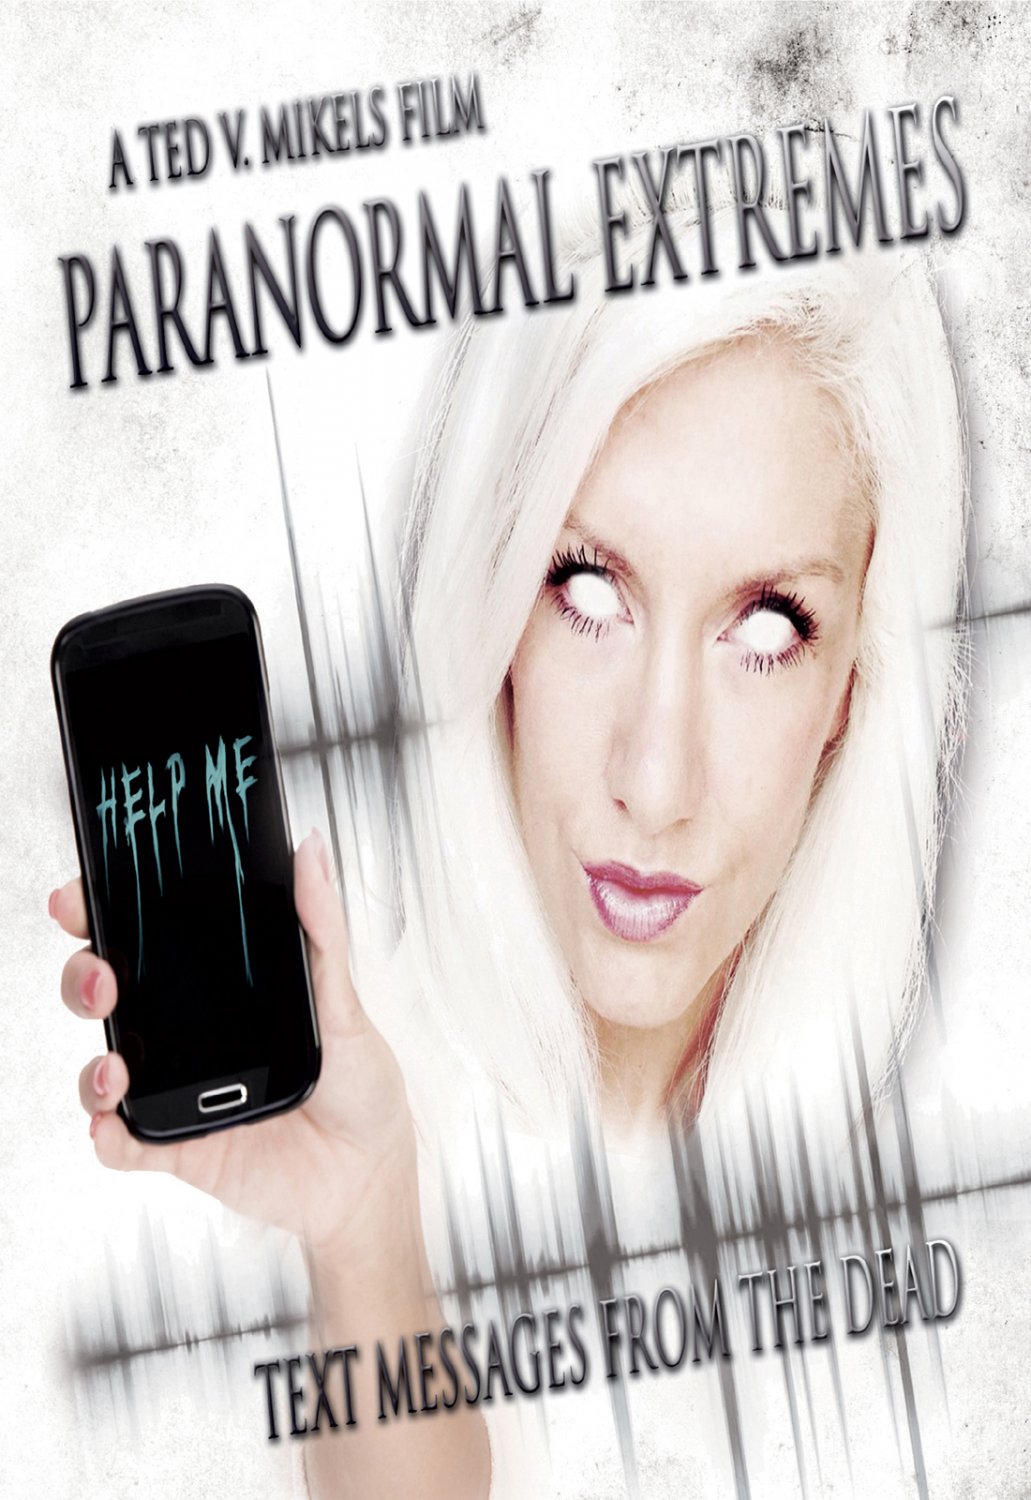 Paranormal Extremes: Text Messages from the Dead (USB) Flash Drive